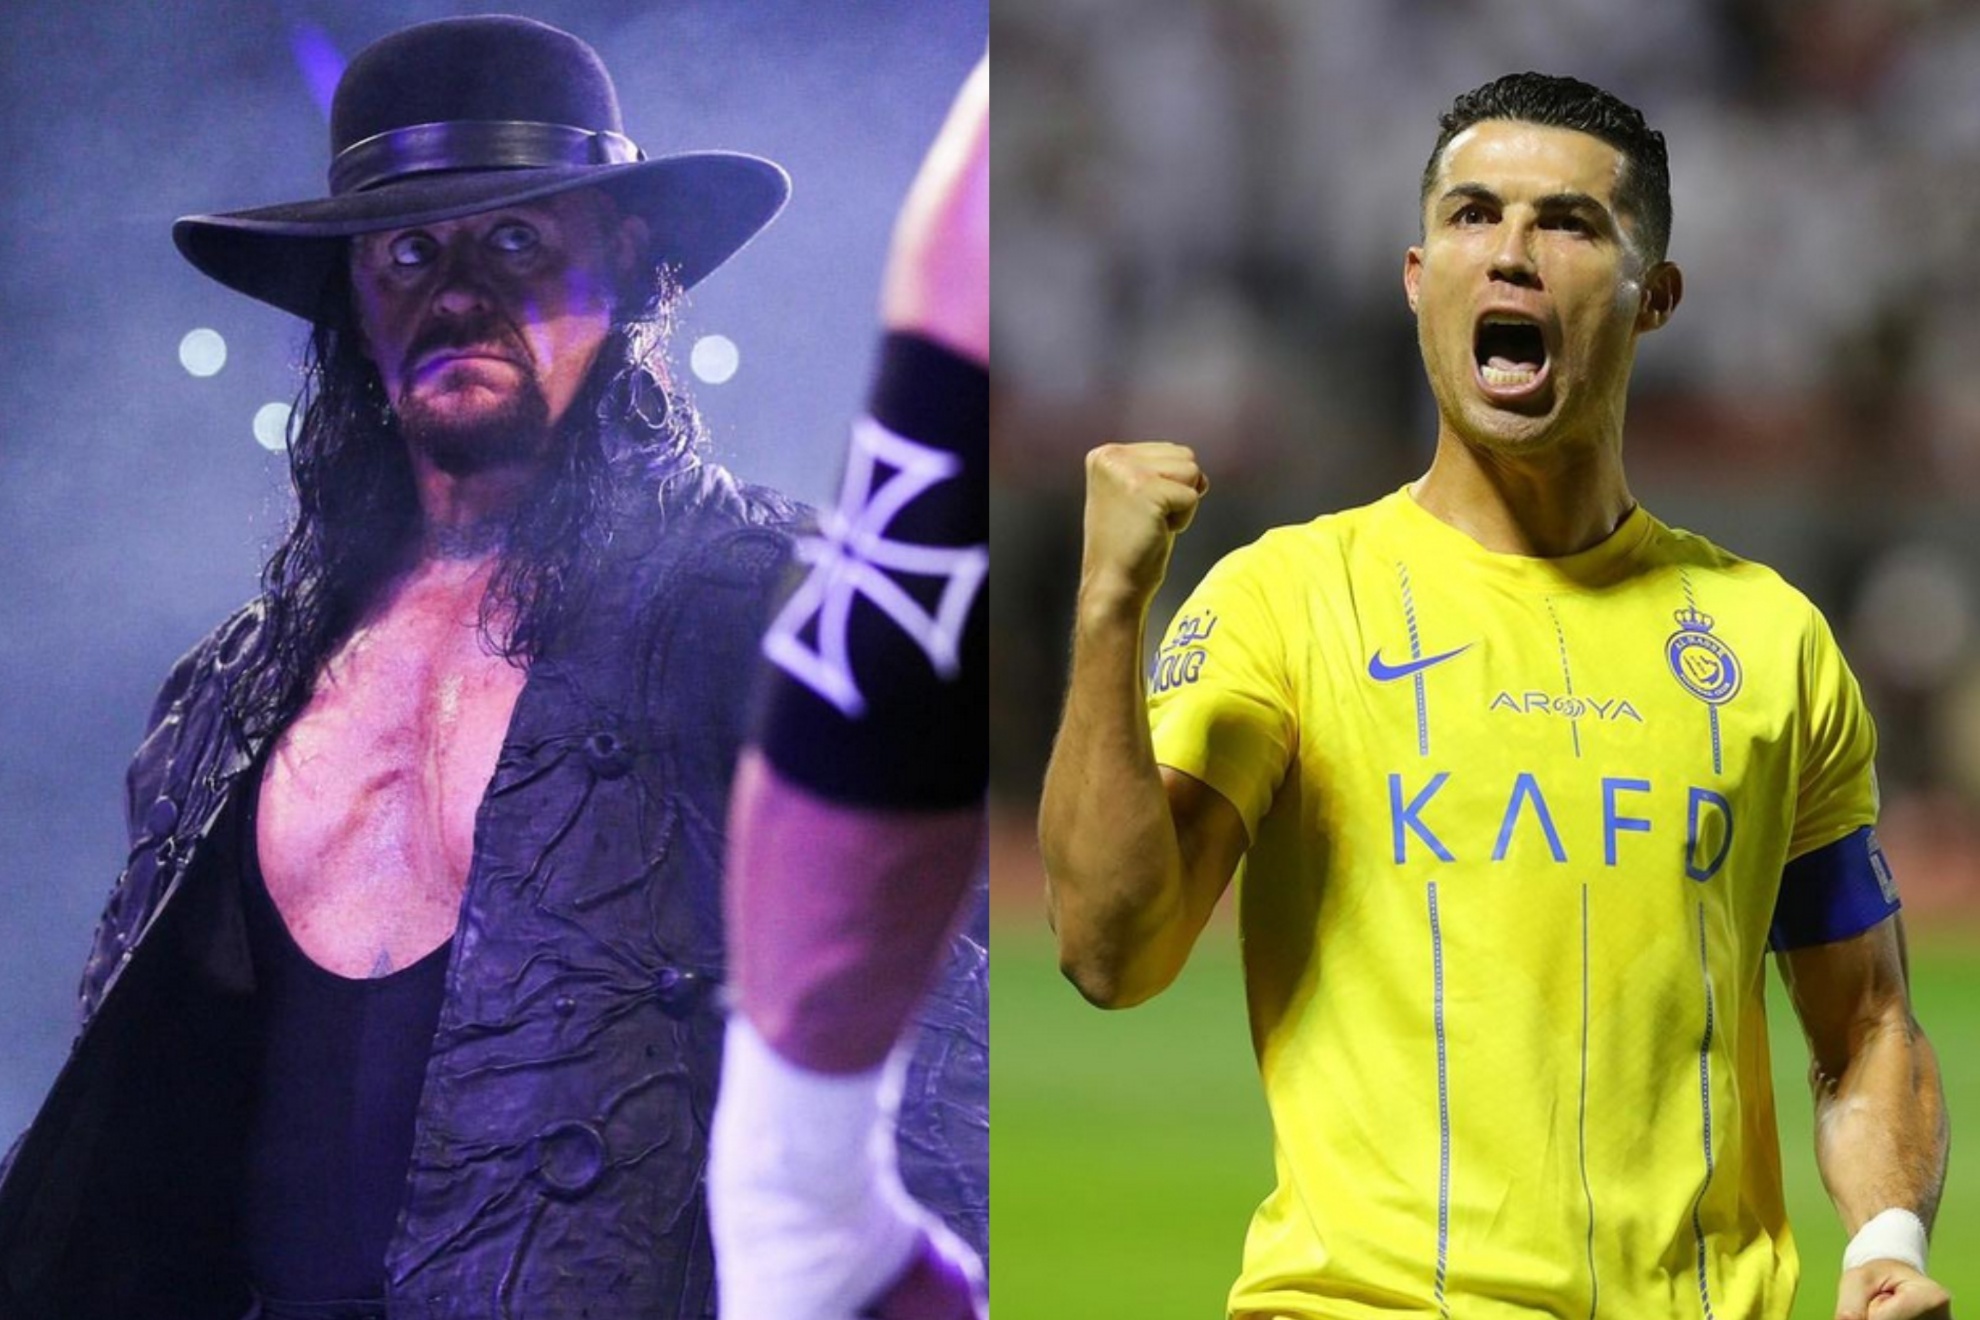 Cristiano Ronaldo was fascinated by the presence of the Undertaker.